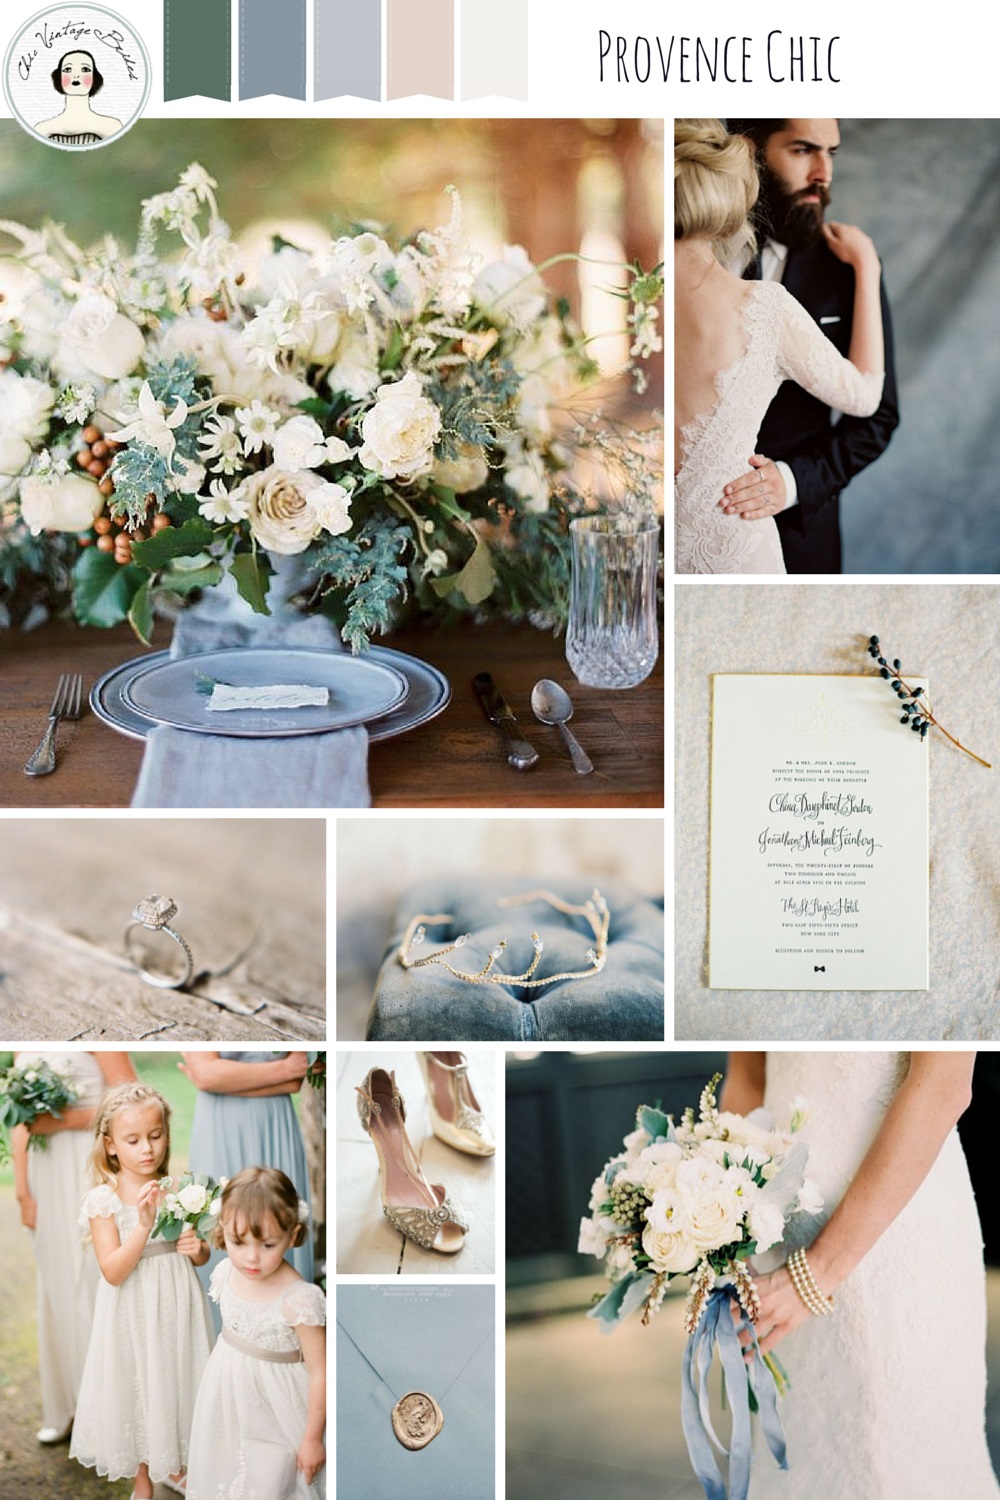 Provence Chic – Romantic Wedding Inspiration in a Palette Inspired by Provence